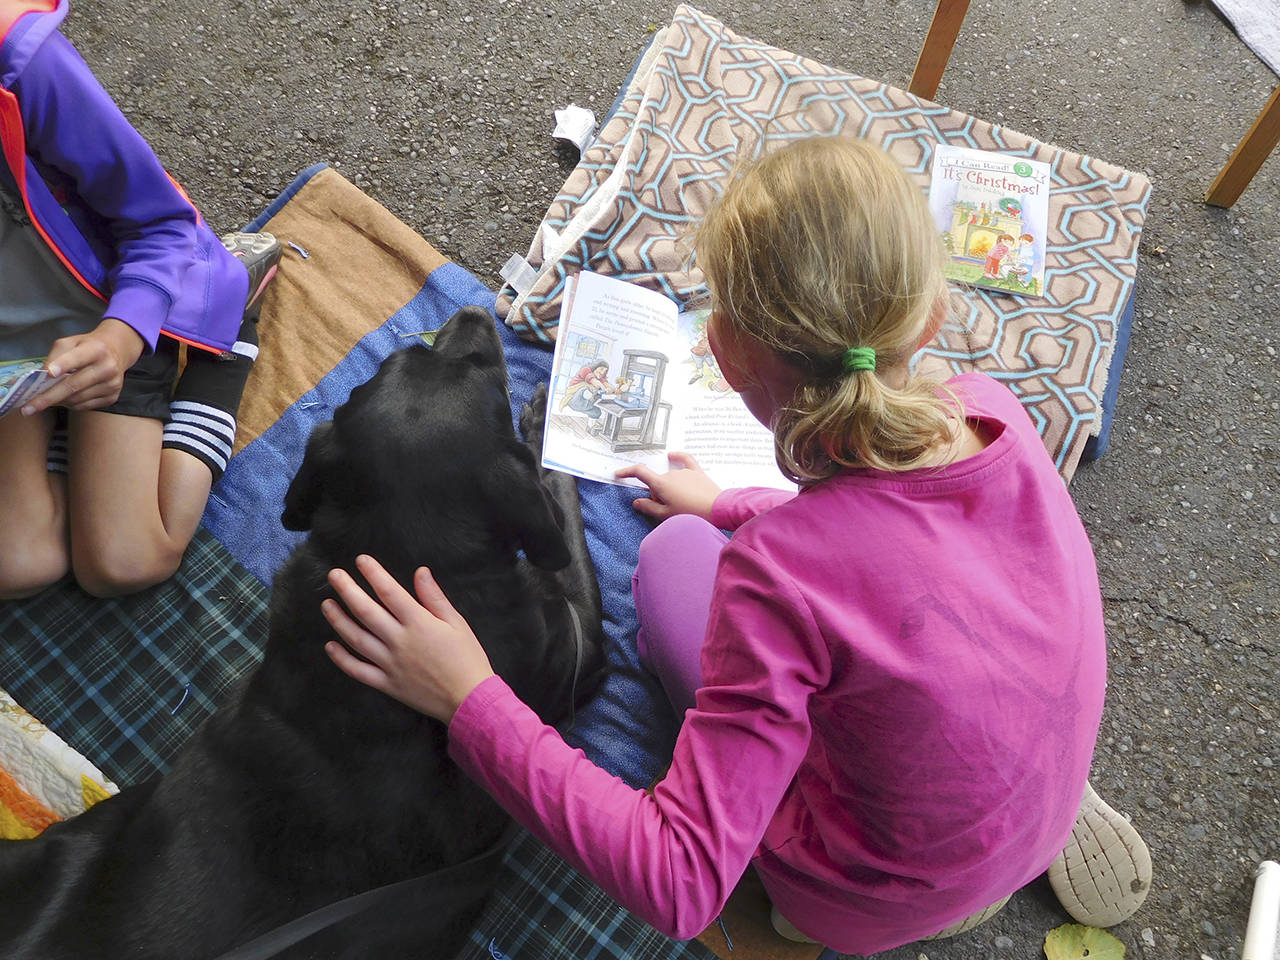 Courtesy photo                                Cathy Carter’s dog Tilly sits with a young girl reading at the Festival in the Park in September. Carter and Tilly volunteer with Canine Reading Buddies of Grays Harbor, one of 29 organizations participating in the 19th annual Volunteer Opportunities Fair on Saturday.